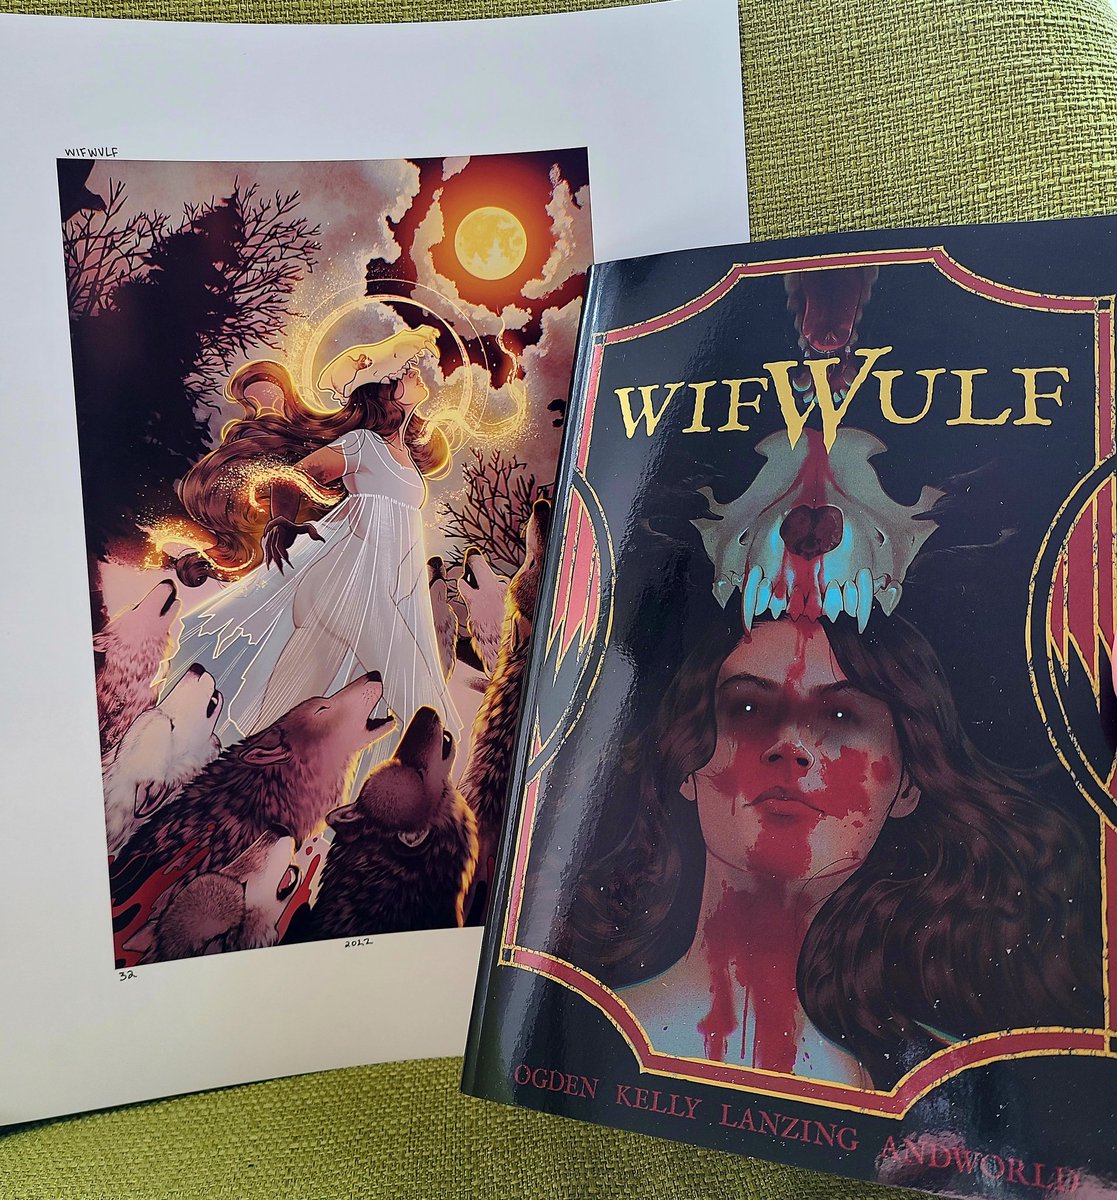 At long last, my Wolf Goddess pledge for #WIFWULF has arrived. Not to brag but I was backer #2 on the whole damn project. @DailenOgden is a truly unique talent, creating the most beautiful and brutal fantasy work from a place of pain and transformation. Kudos to the whole team!